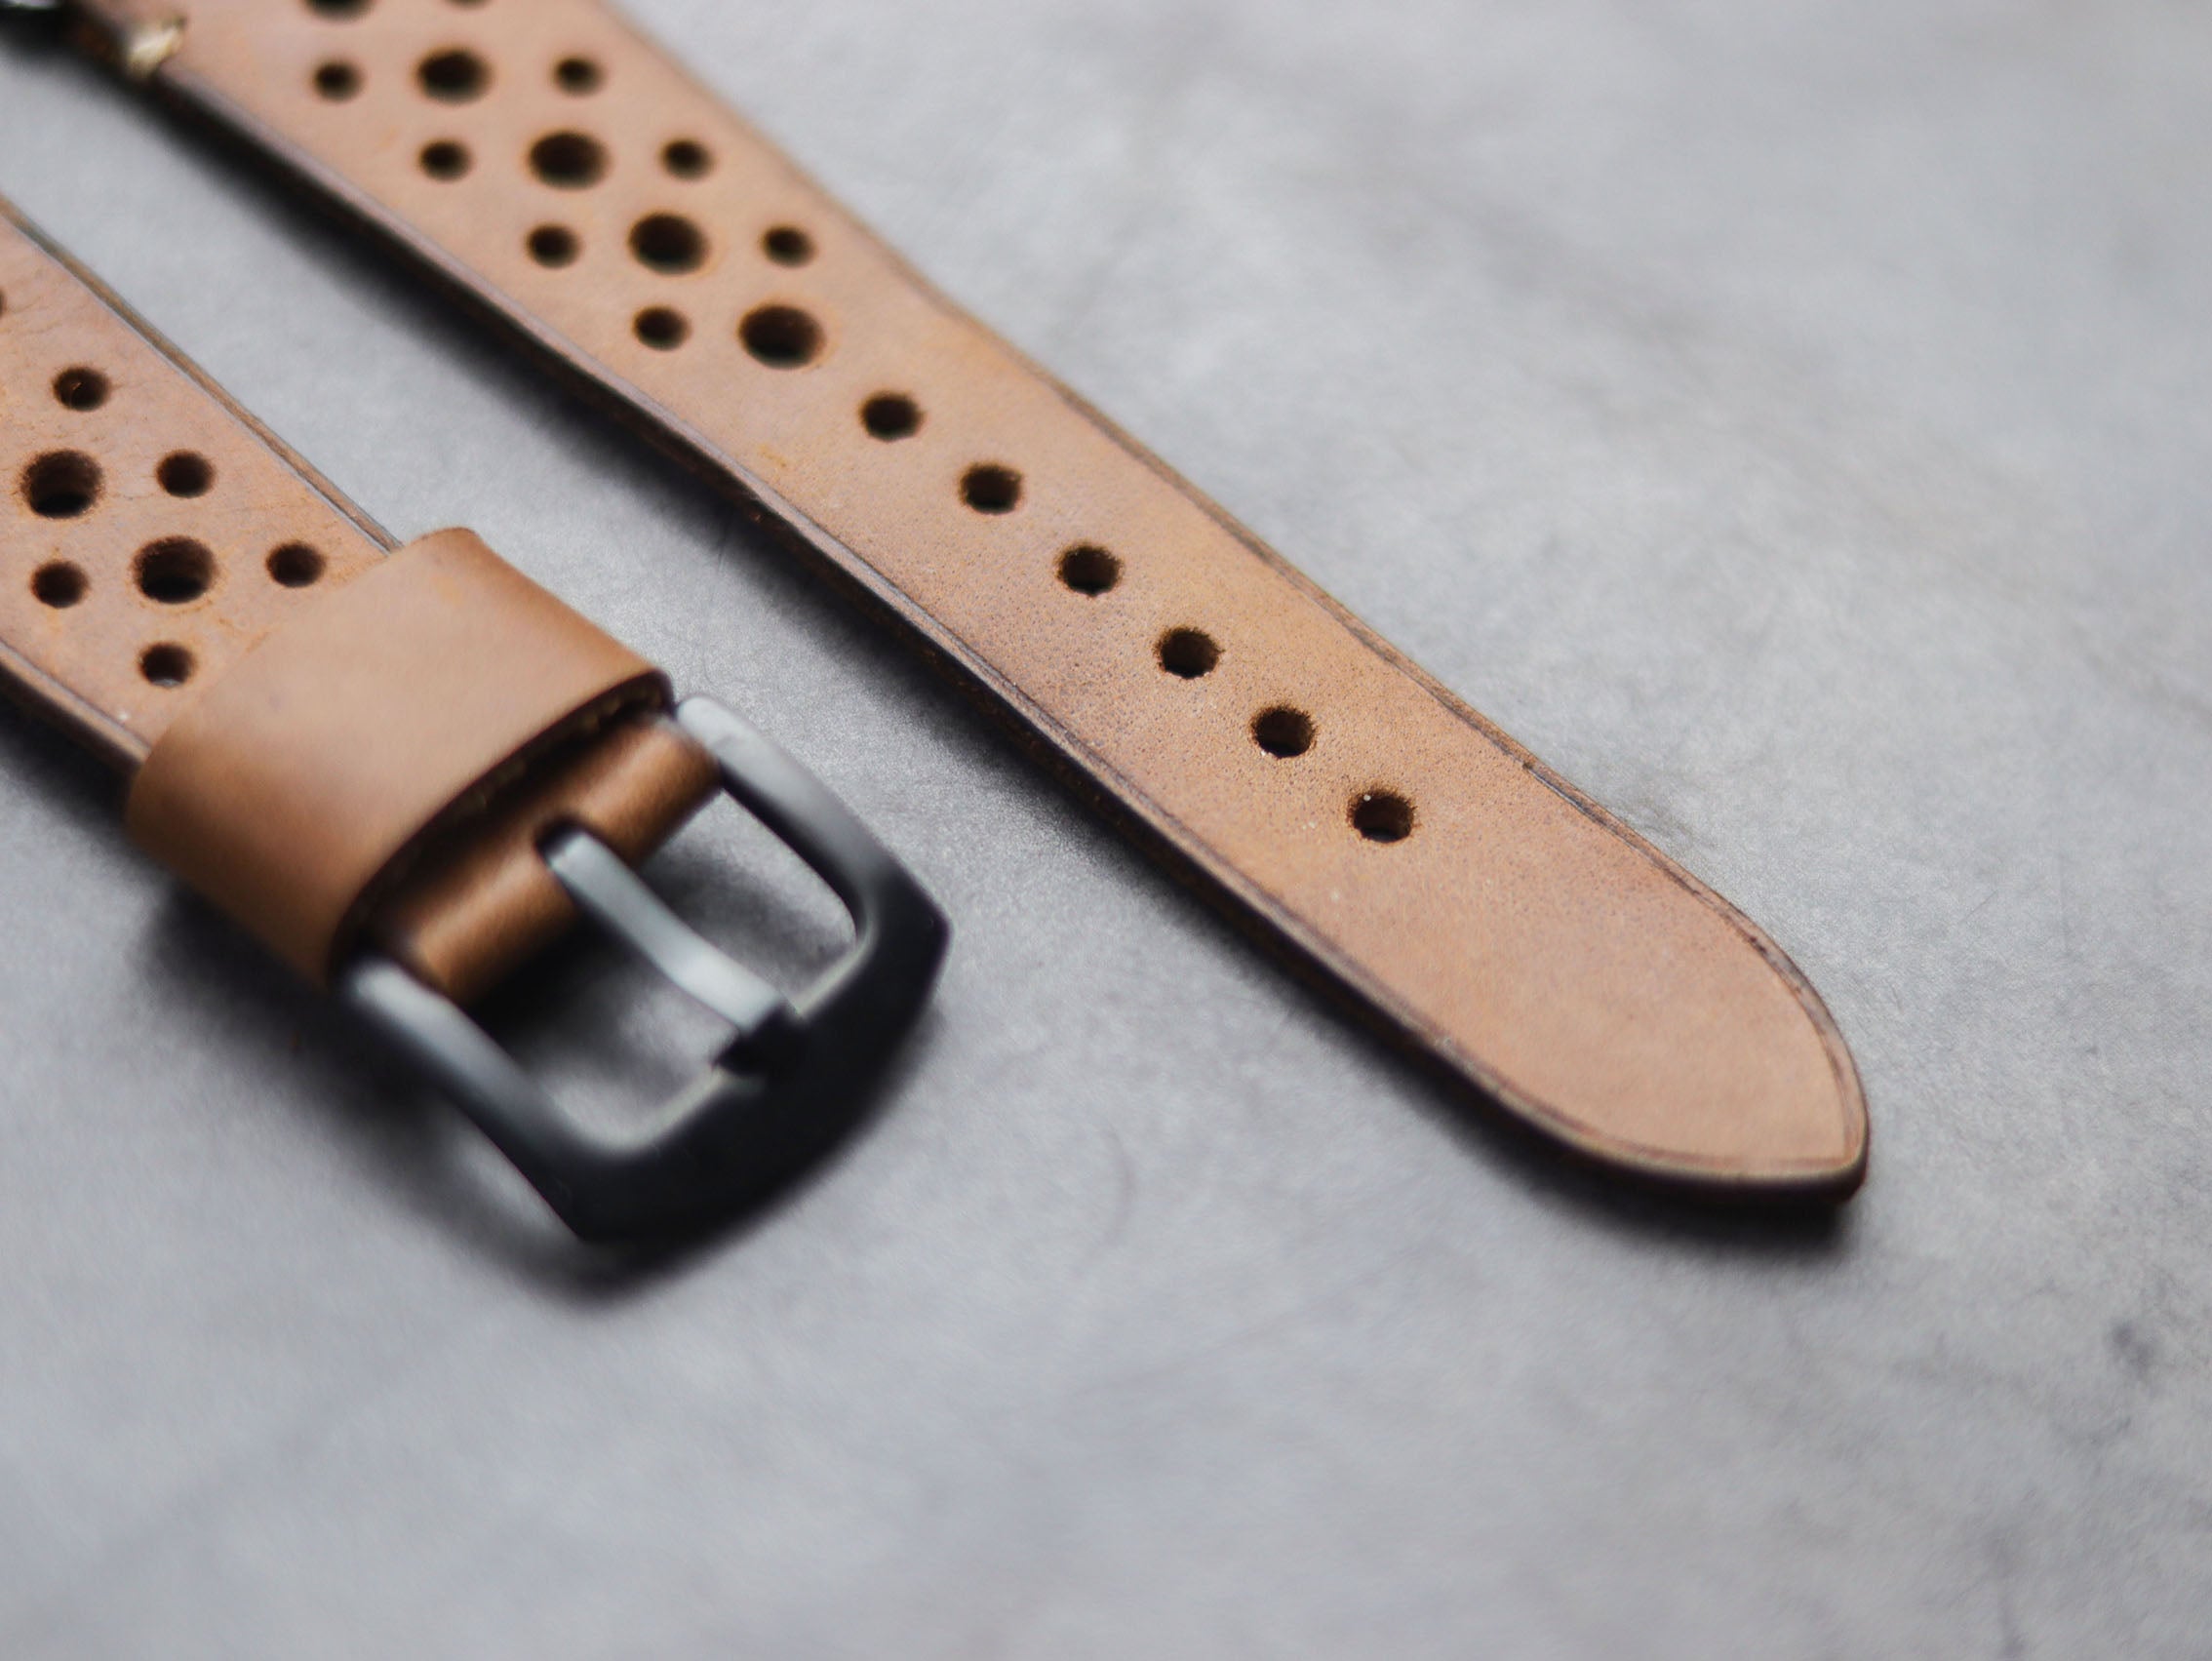 CARAMEL BROWN RALLY HAND-CRAFTED APPLE WATCH STRAPS